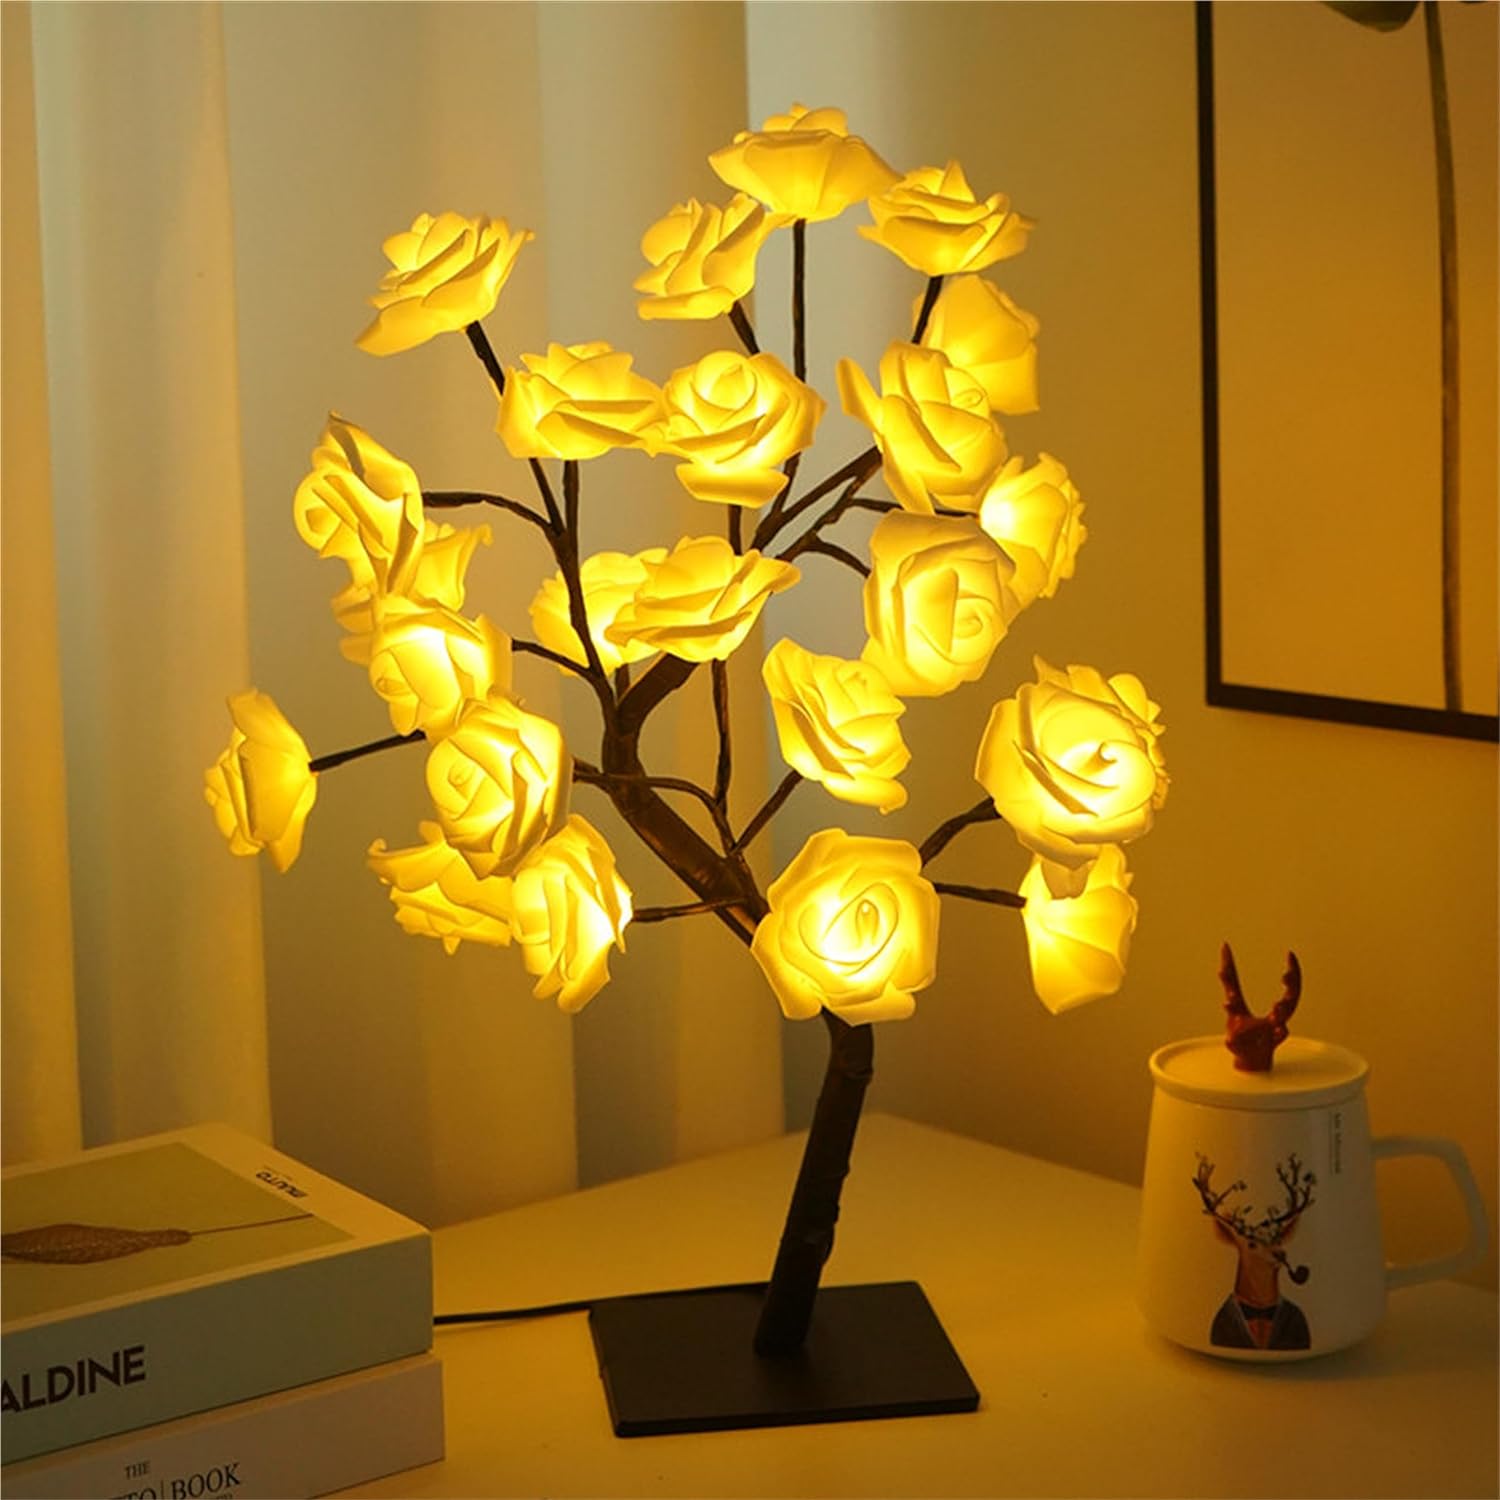 XVICO LED Desk Lamps LED Rose Tree Lamp Artificial Bonsai Tree Night Light Centerpiece Fairy Light for Home Bedroom Valentines Day Easter Wedding Party Decor LED Desk Light (Yellow) 3